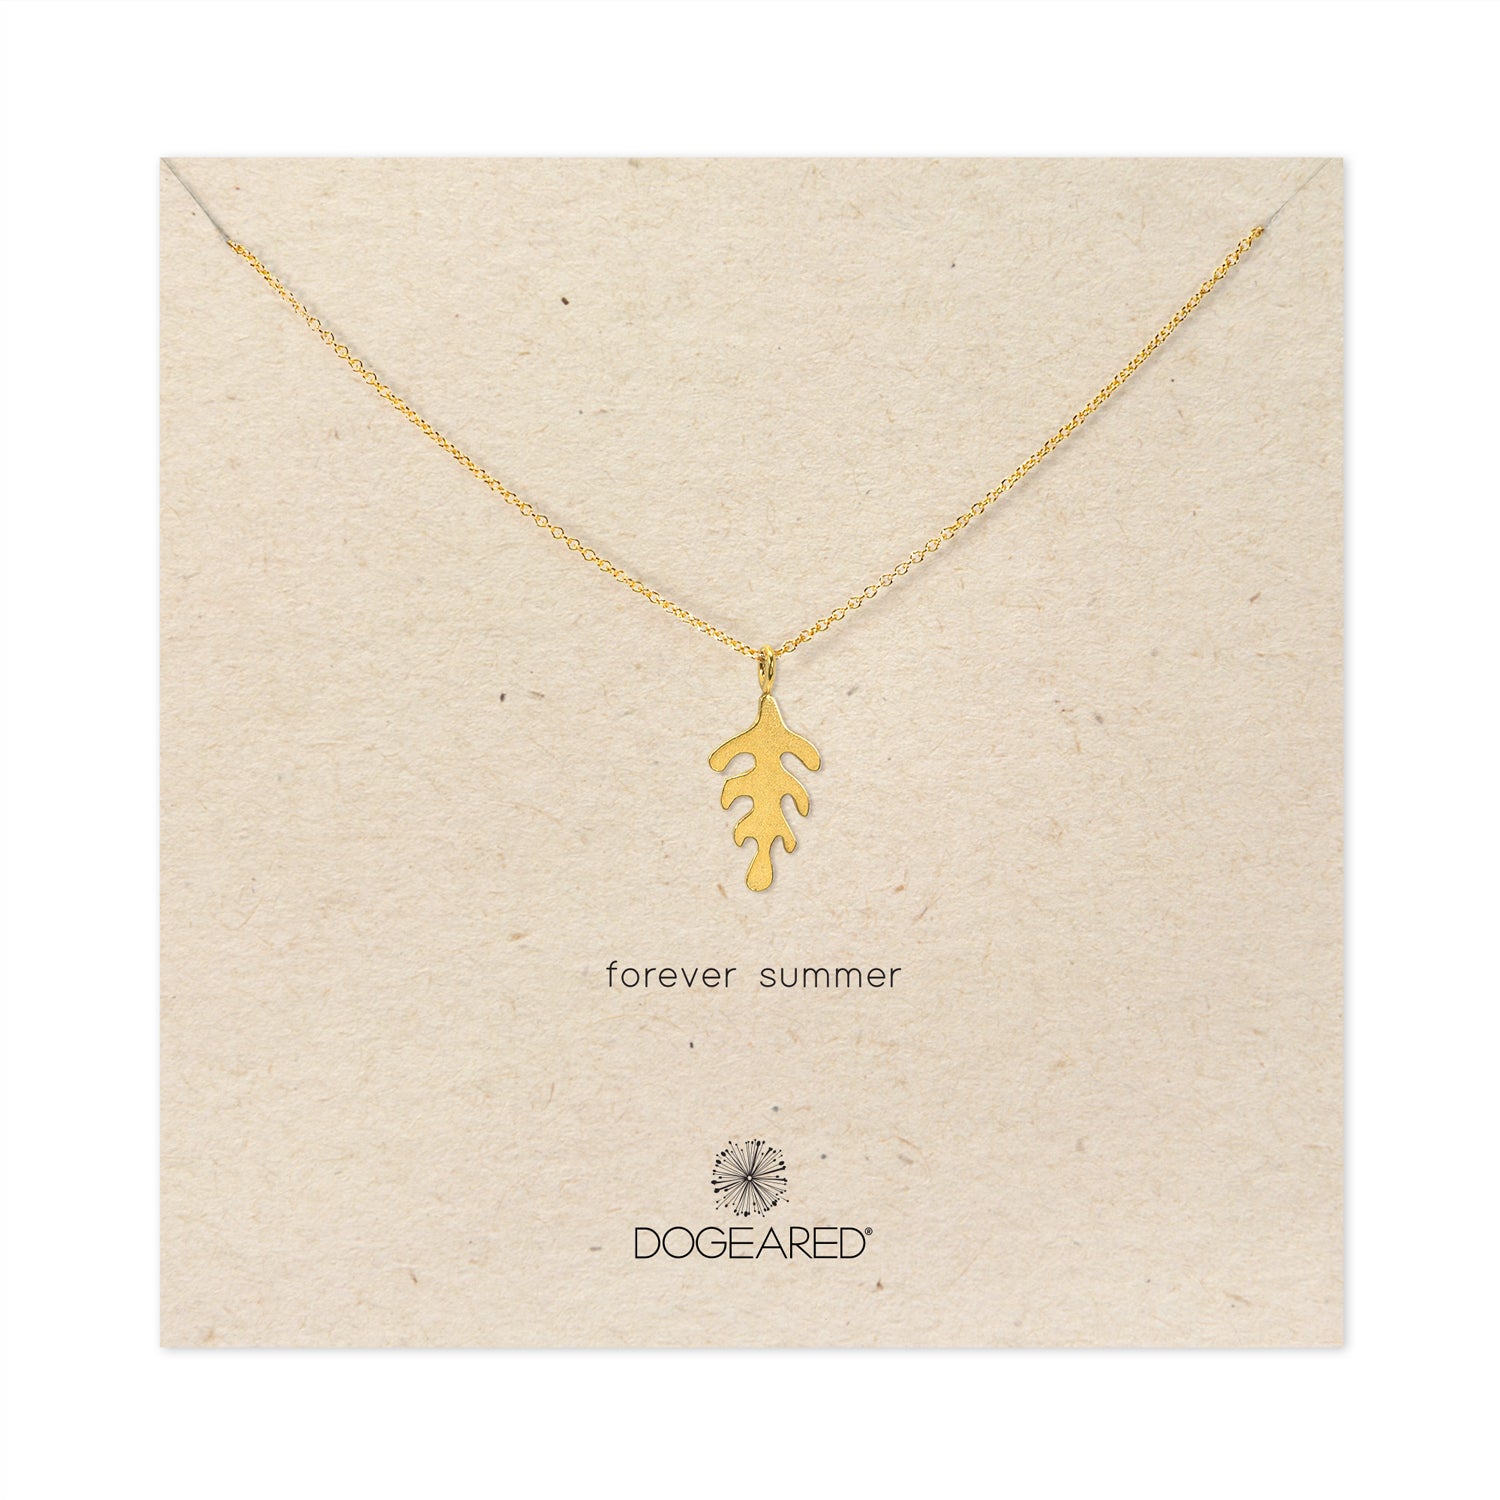 forever summer sea weed necklace